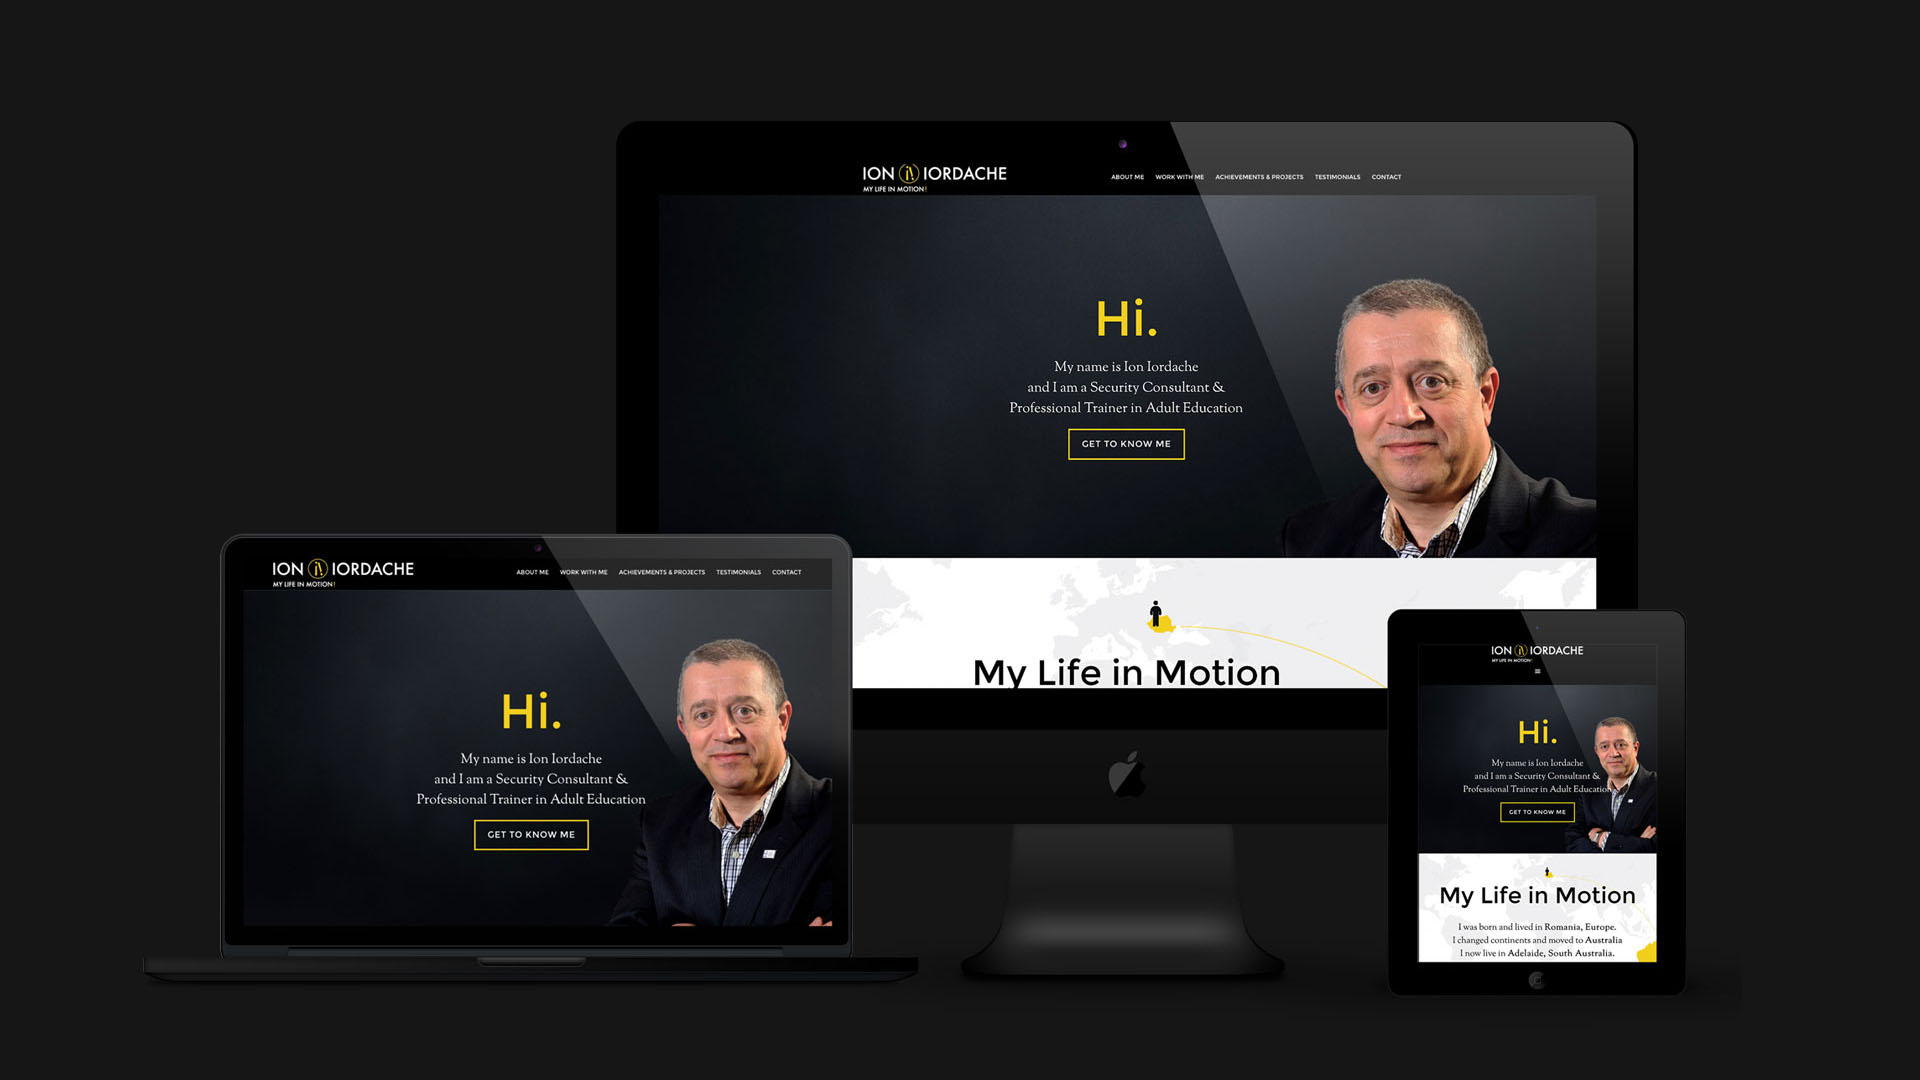 This PixelUp illustration presents an iMac, a laptop, and an iPad positioned against a linear gradient backdrop in dark grey hues. Each device displays Ion Iordache's website homepage, featuring his portrait against a black background. Striking gold headlines and messages contrast with the dark setting. The image aims to demonstrate the responsiveness of the website design. The Ion Iordache Project is highlighted within PixelUp's portfolio.